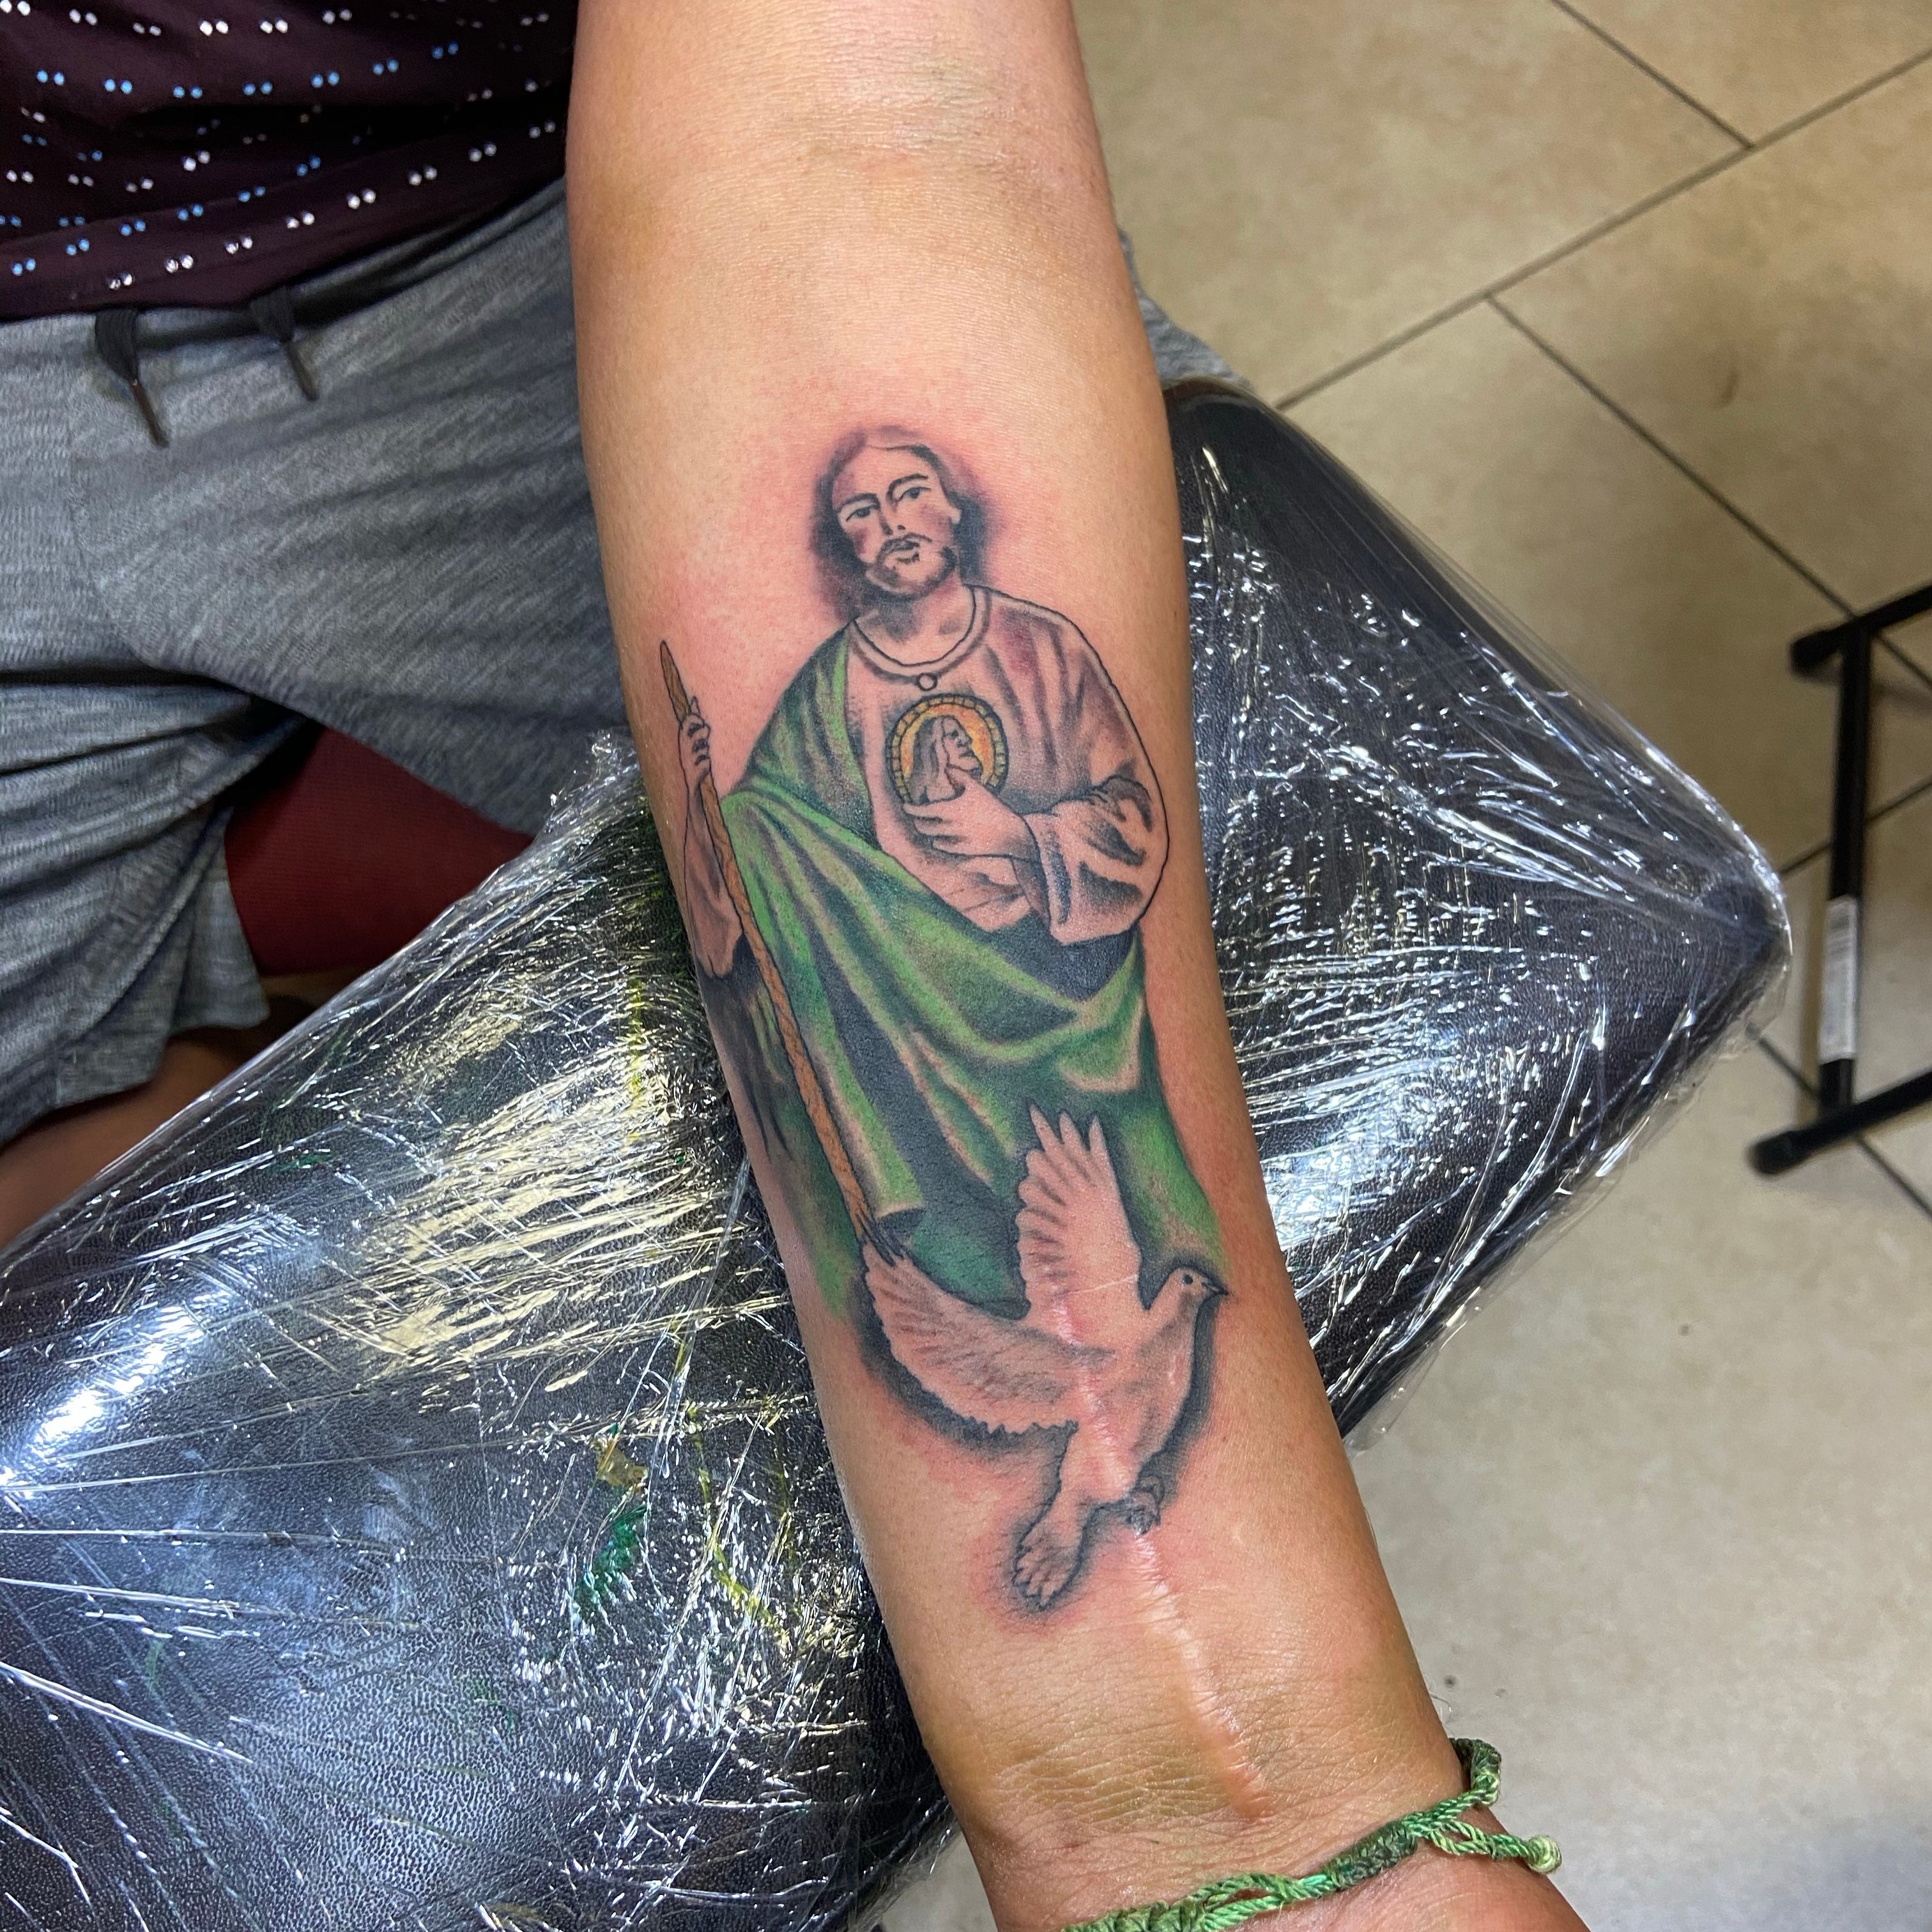 25 Best San Judas Tattoo Ideas With Meanings - Tattoo Pro | Saint jude  tattoo for women, Tattoos for daughters, Pretty hand tattoos